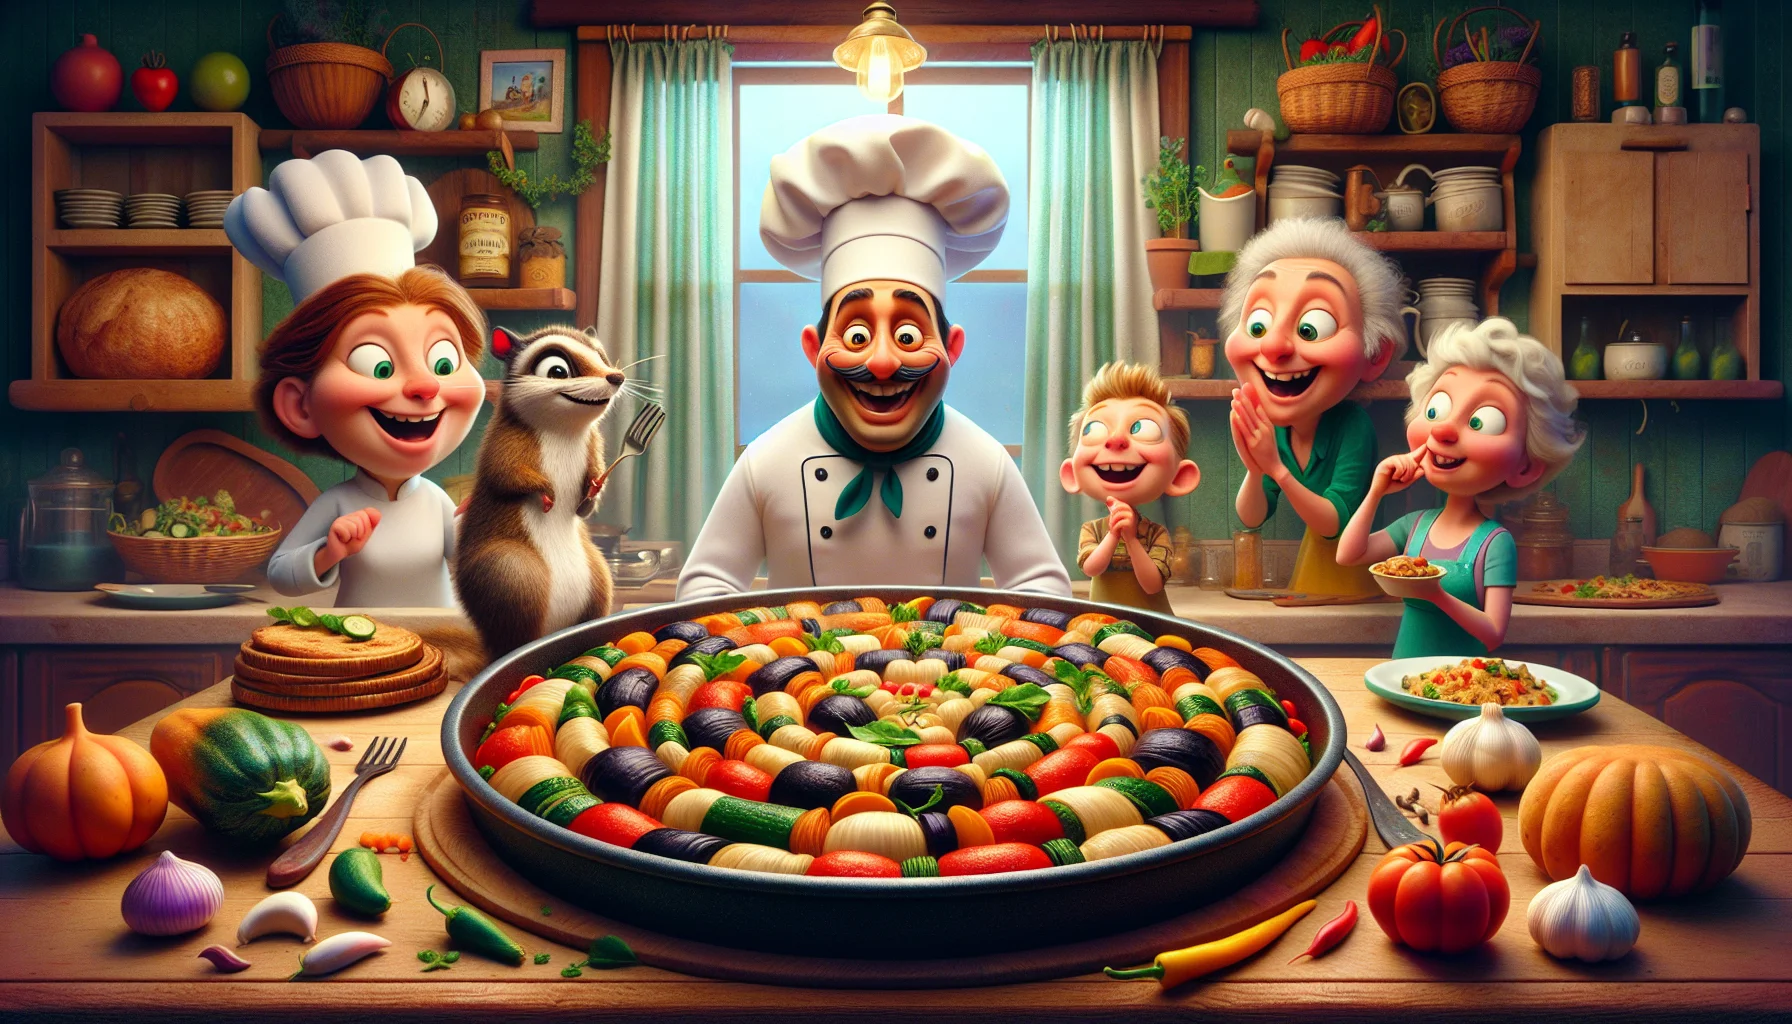 Generate a humorous image that depicts a scene of Ratatouille as prepared in the style of the Smitten Kitchen. The dish is center stage, invitingly presented, showing off its colorful vegetables. Around the dish, incorporate a playful scene of whimsical characters: a jovial chef with a white hat, an excited diner who can't wait to dig in, and perhaps a clever squirrel eyeing the food with curiosity. All of these are gathered in a cozy, cost-efficient themed kitchen. The ambiance is lively, encouraging the viewers to realize they can eat healthy without spending a fortune.